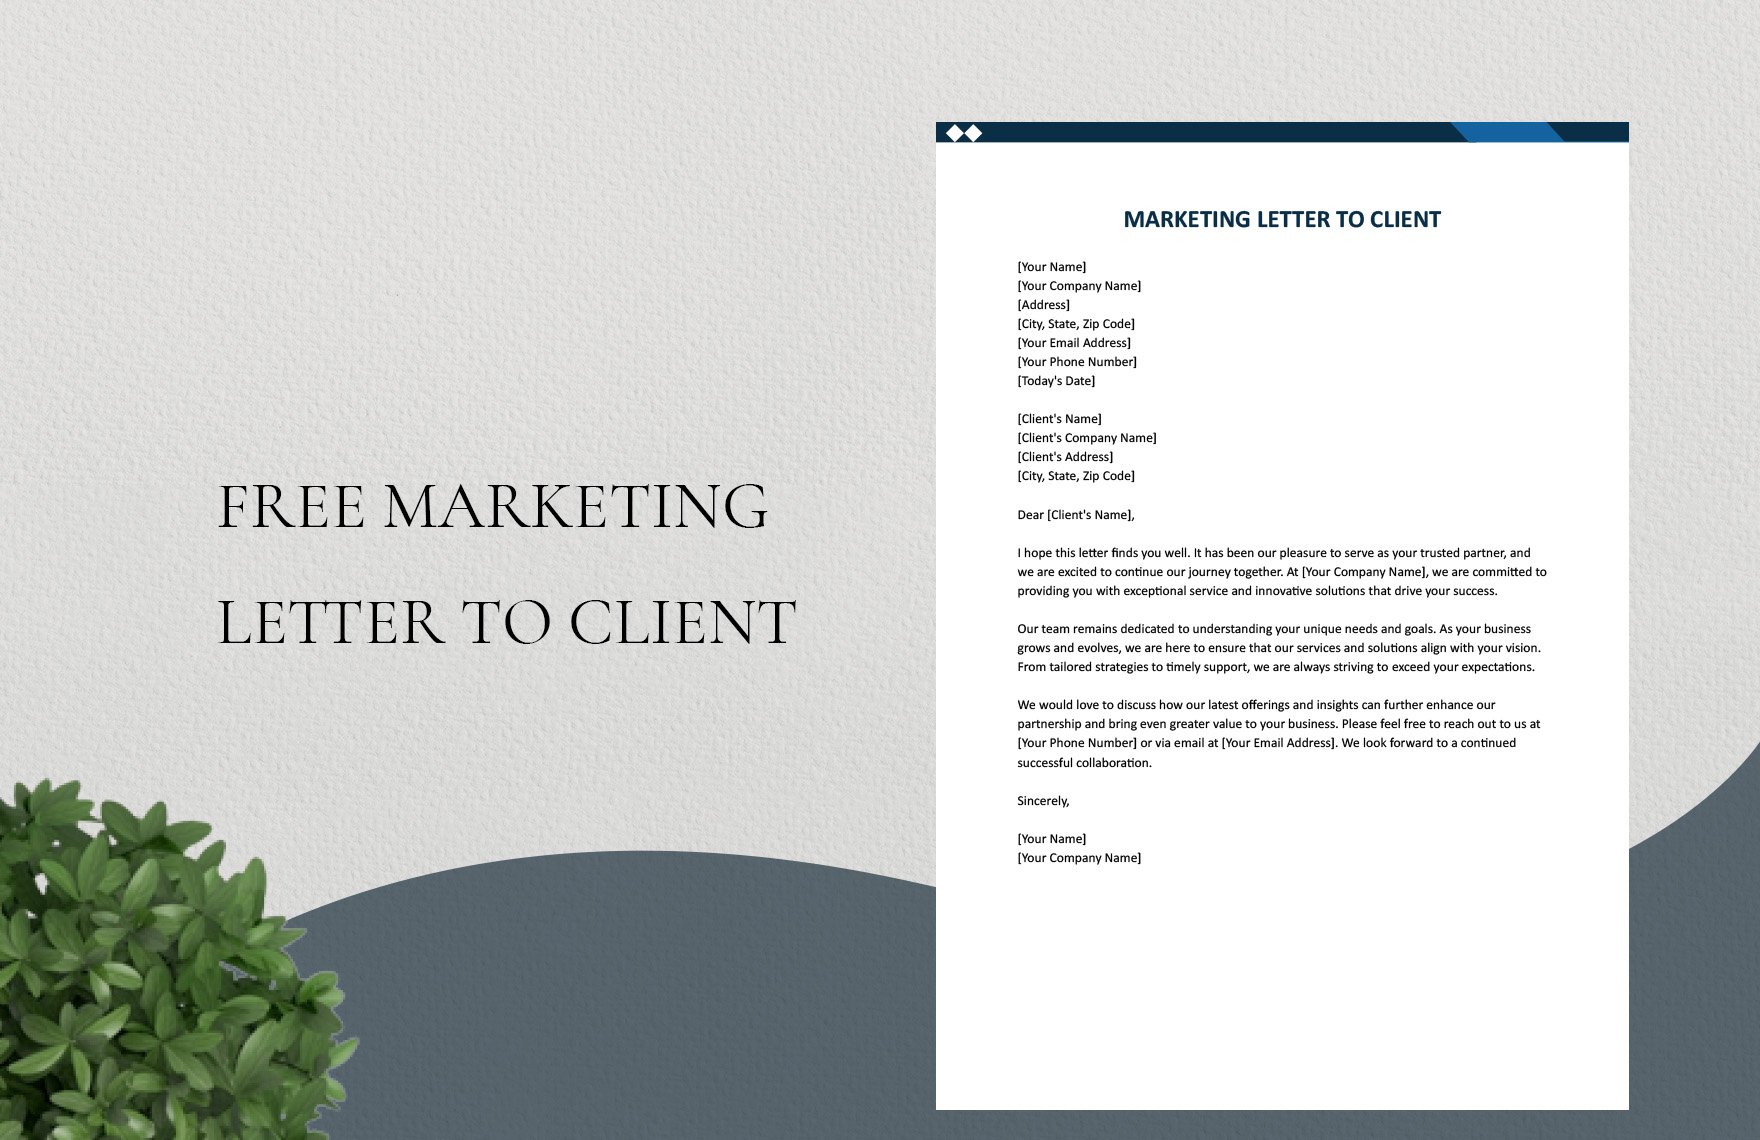 Marketing Letter to Client